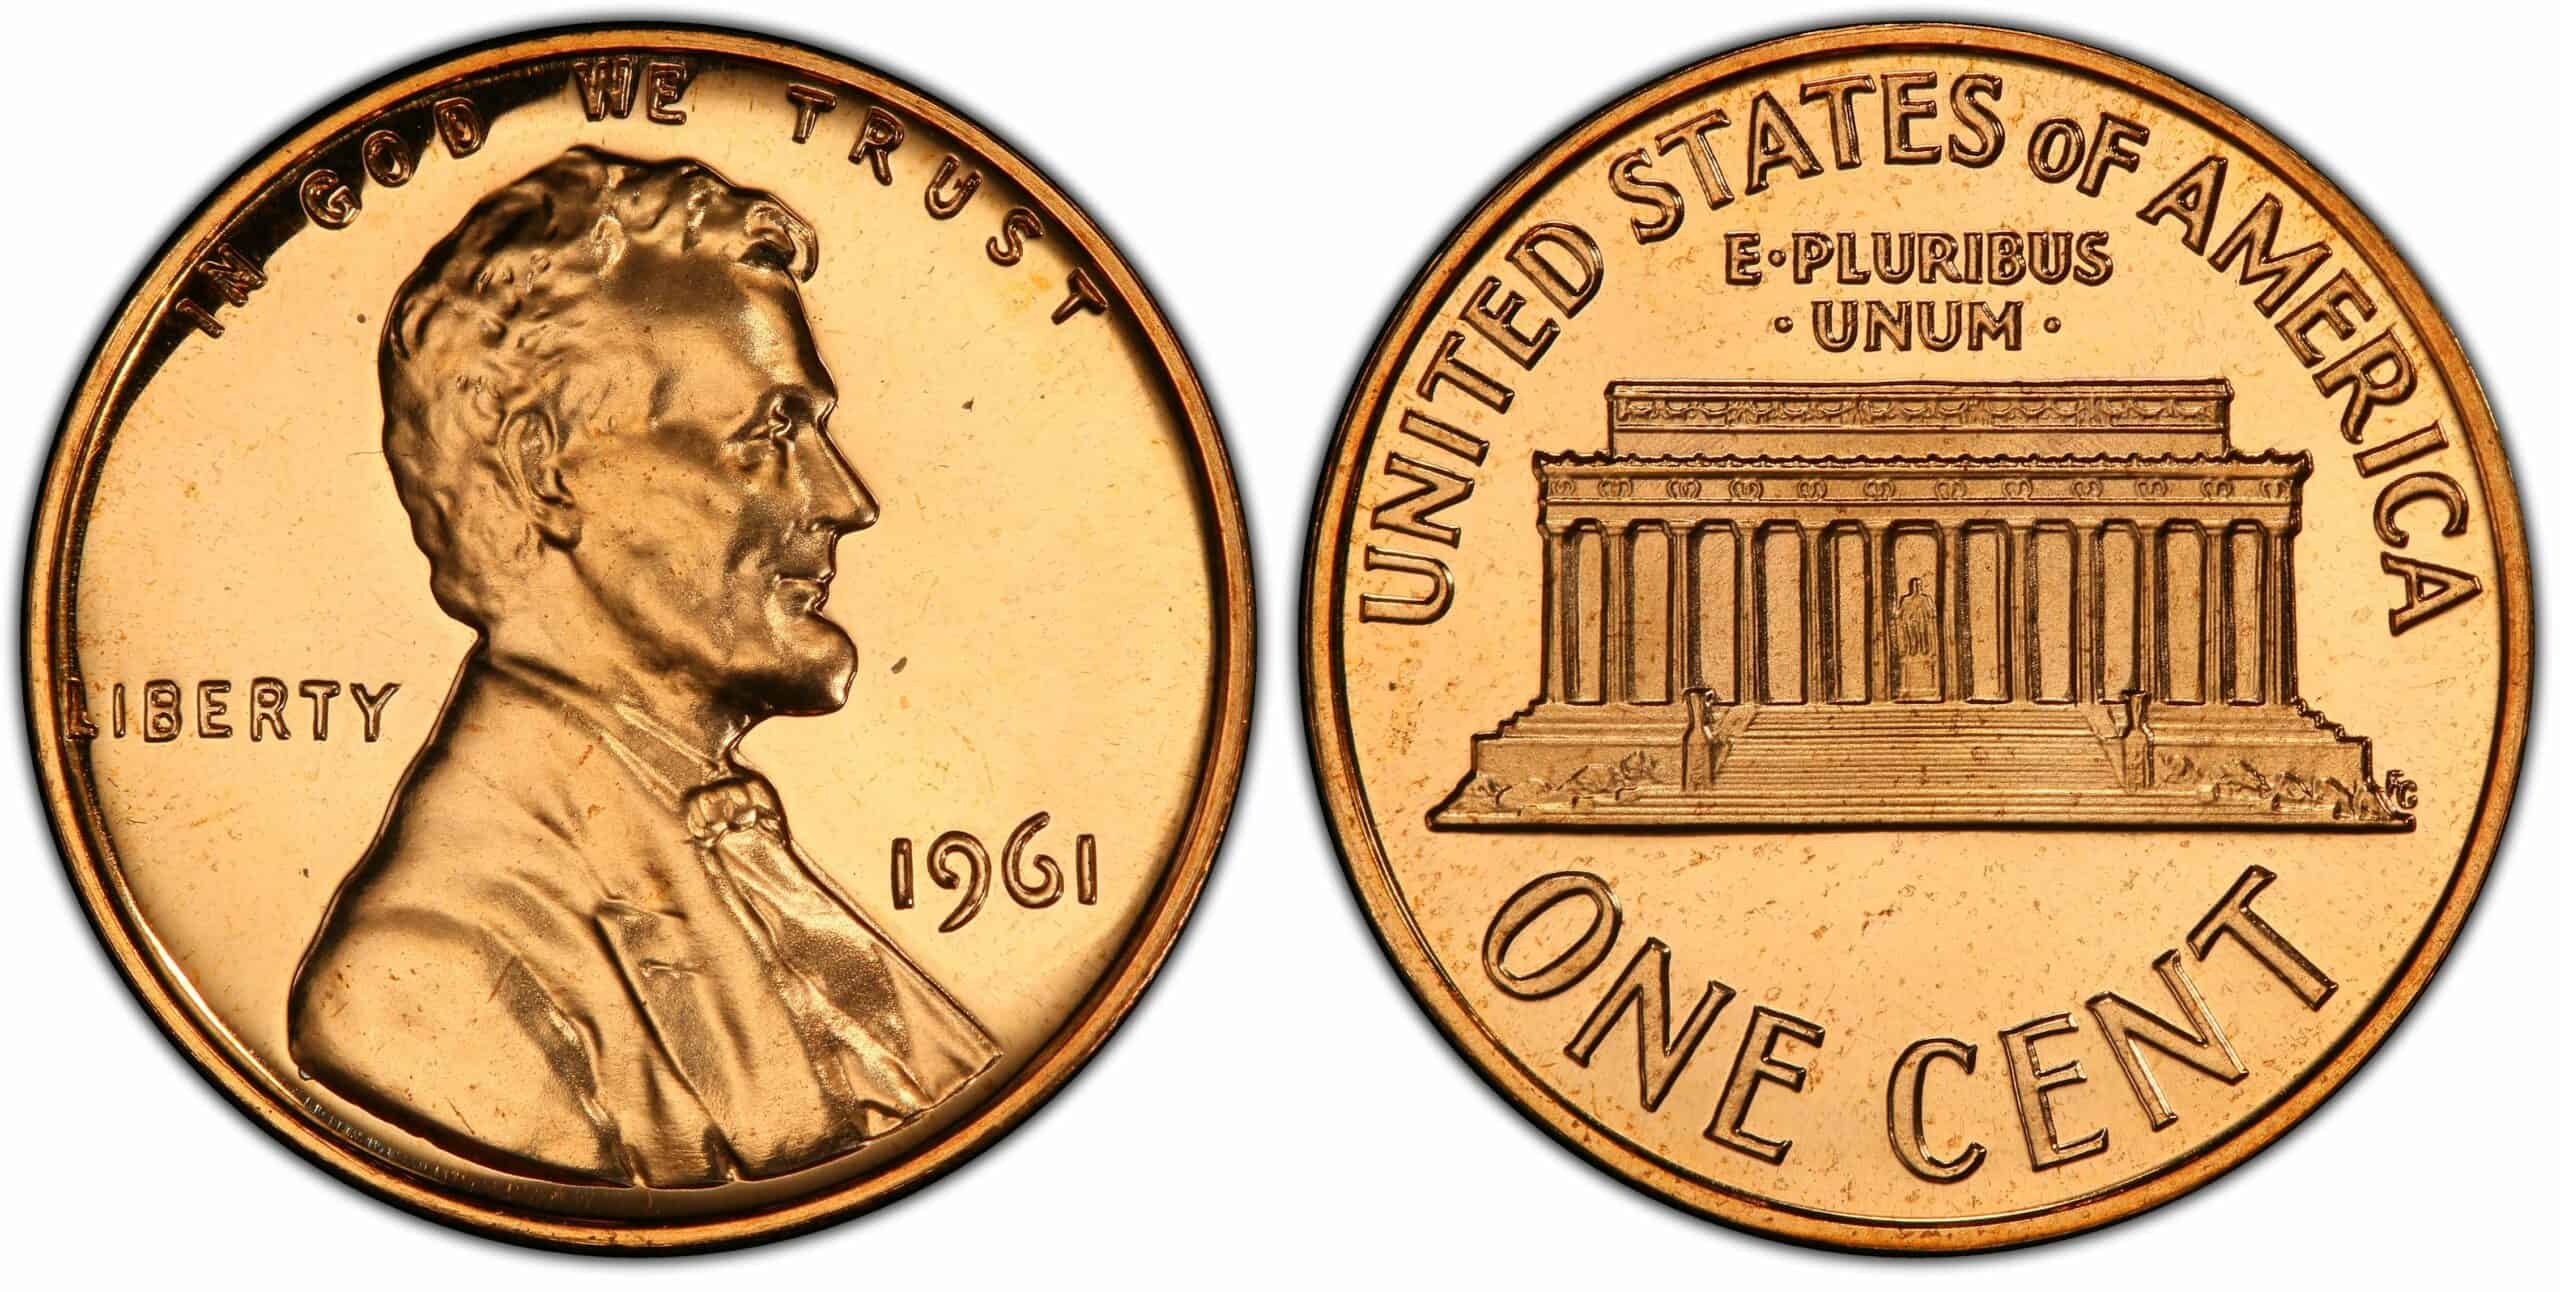 1961 Lincoln Memorial penny (proof)